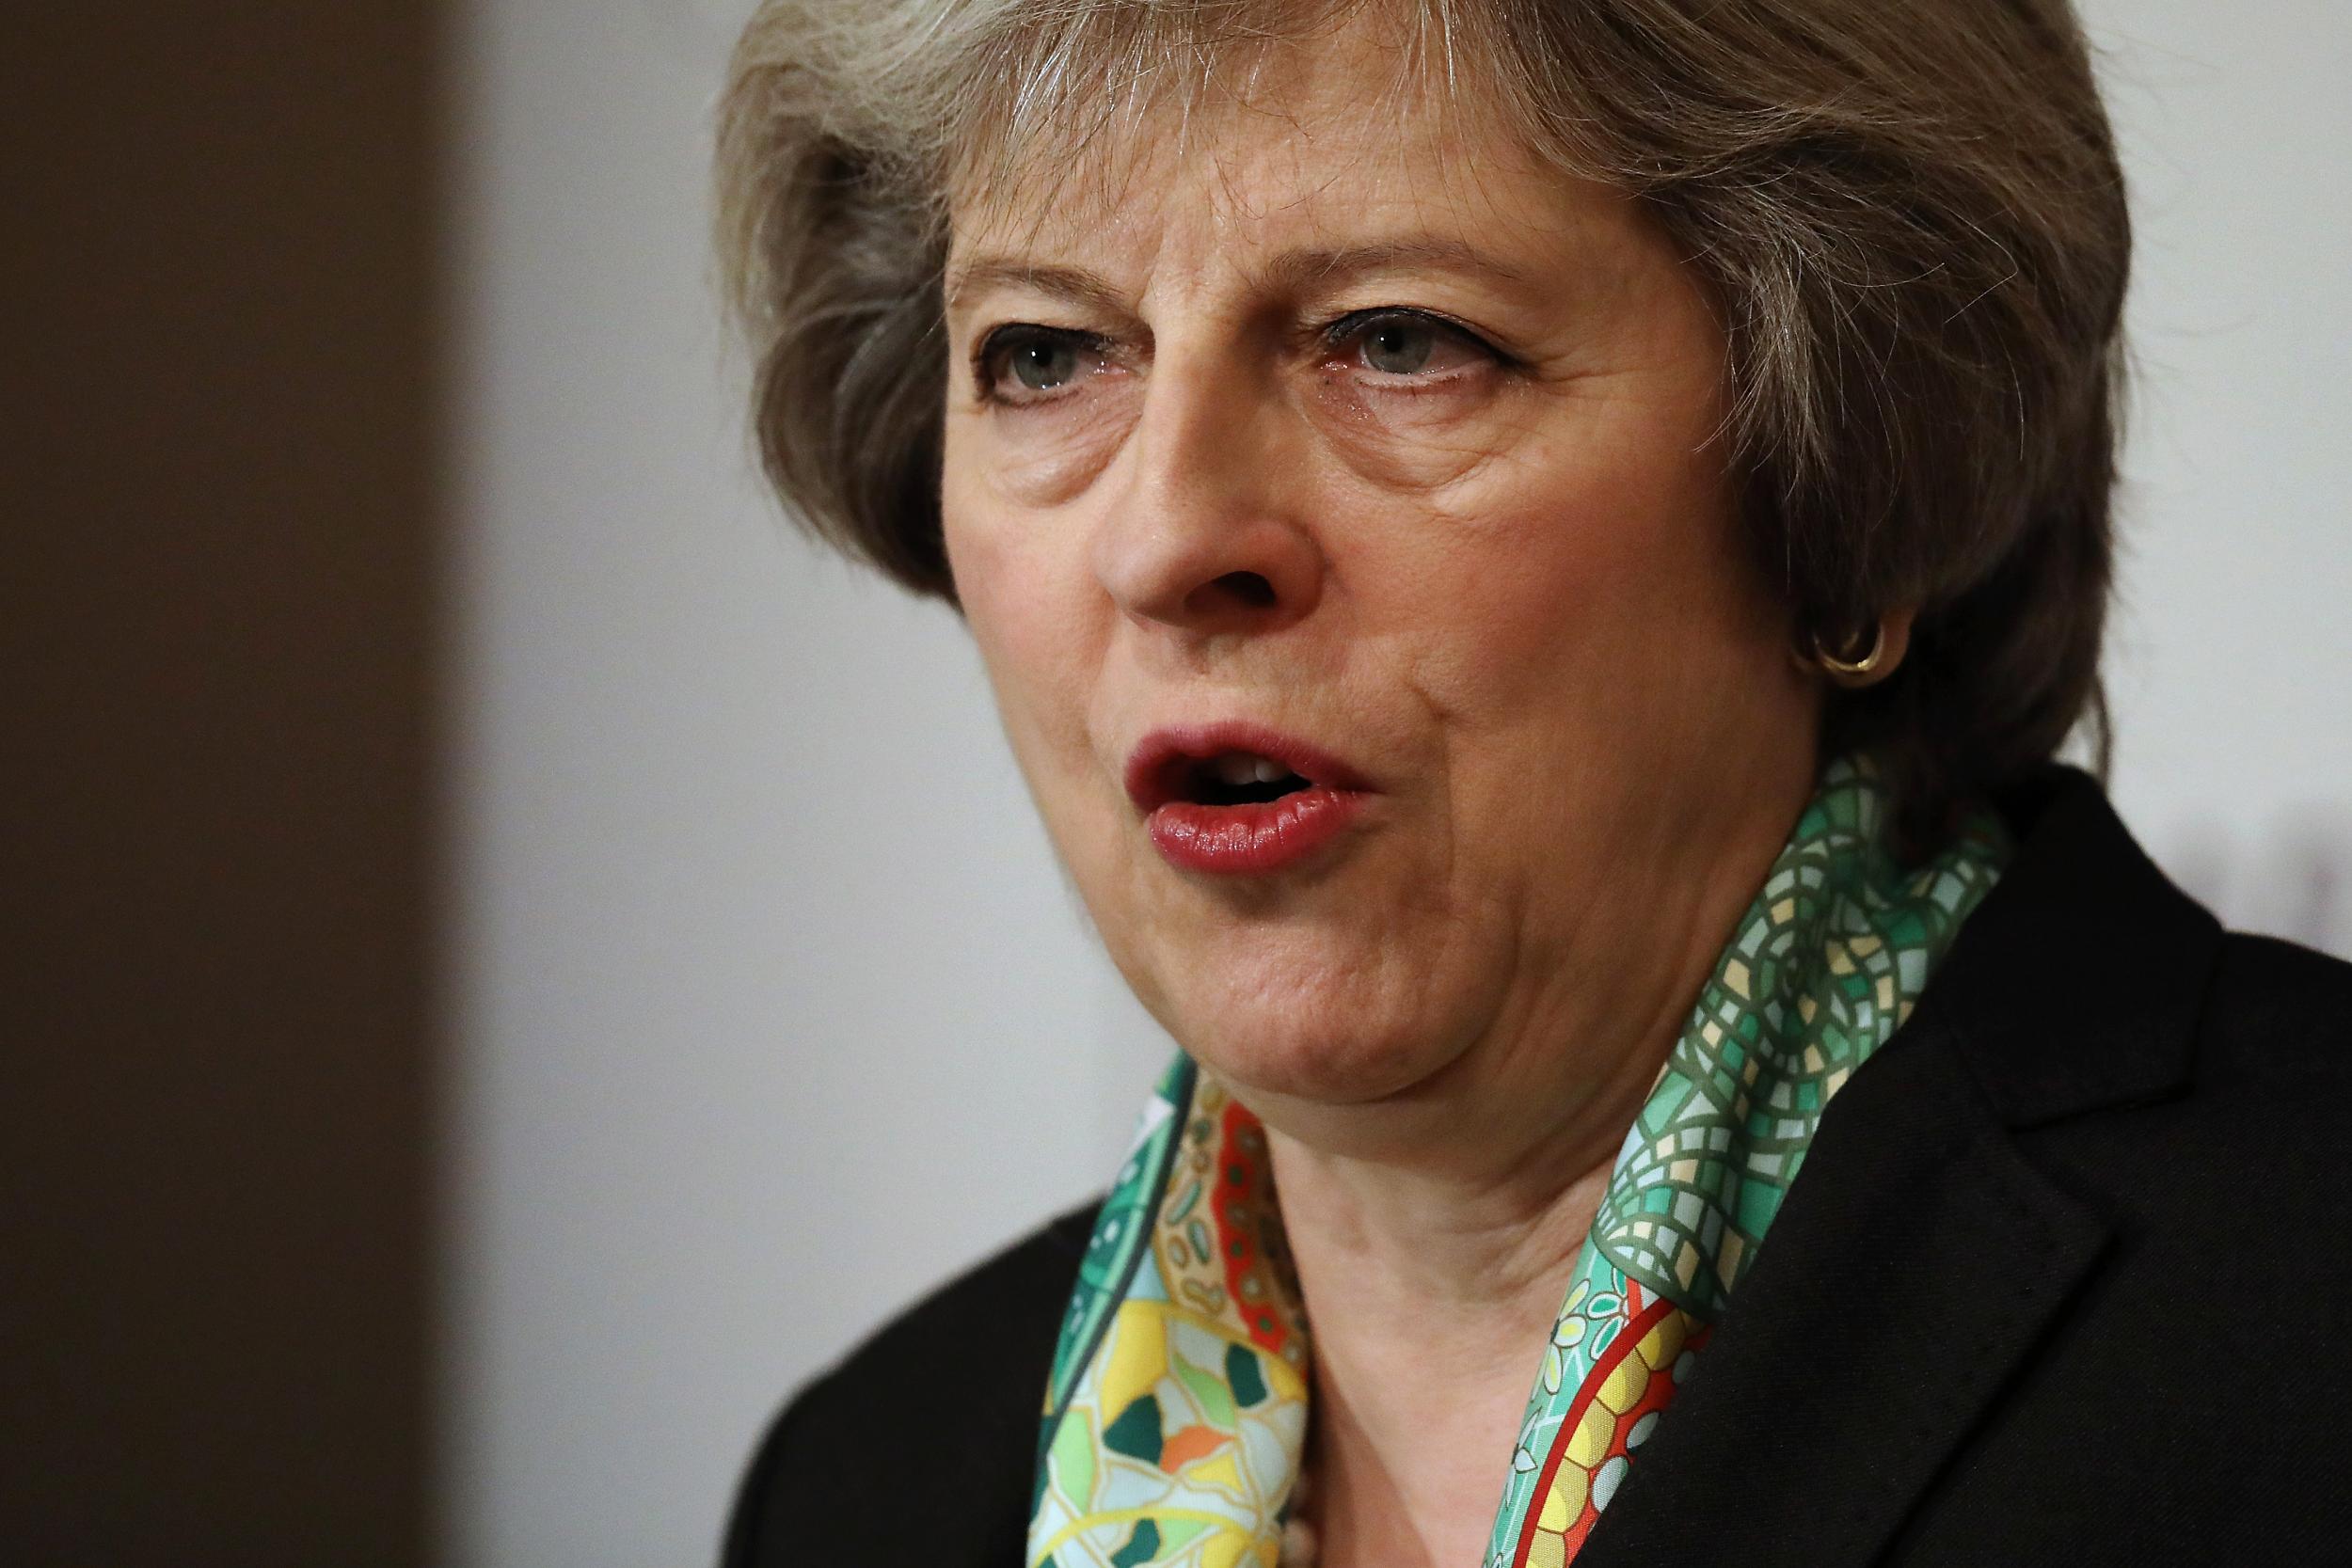 The Prime Minister has pledged to improve mental health services, but failed to outline exactly how this will be paid for